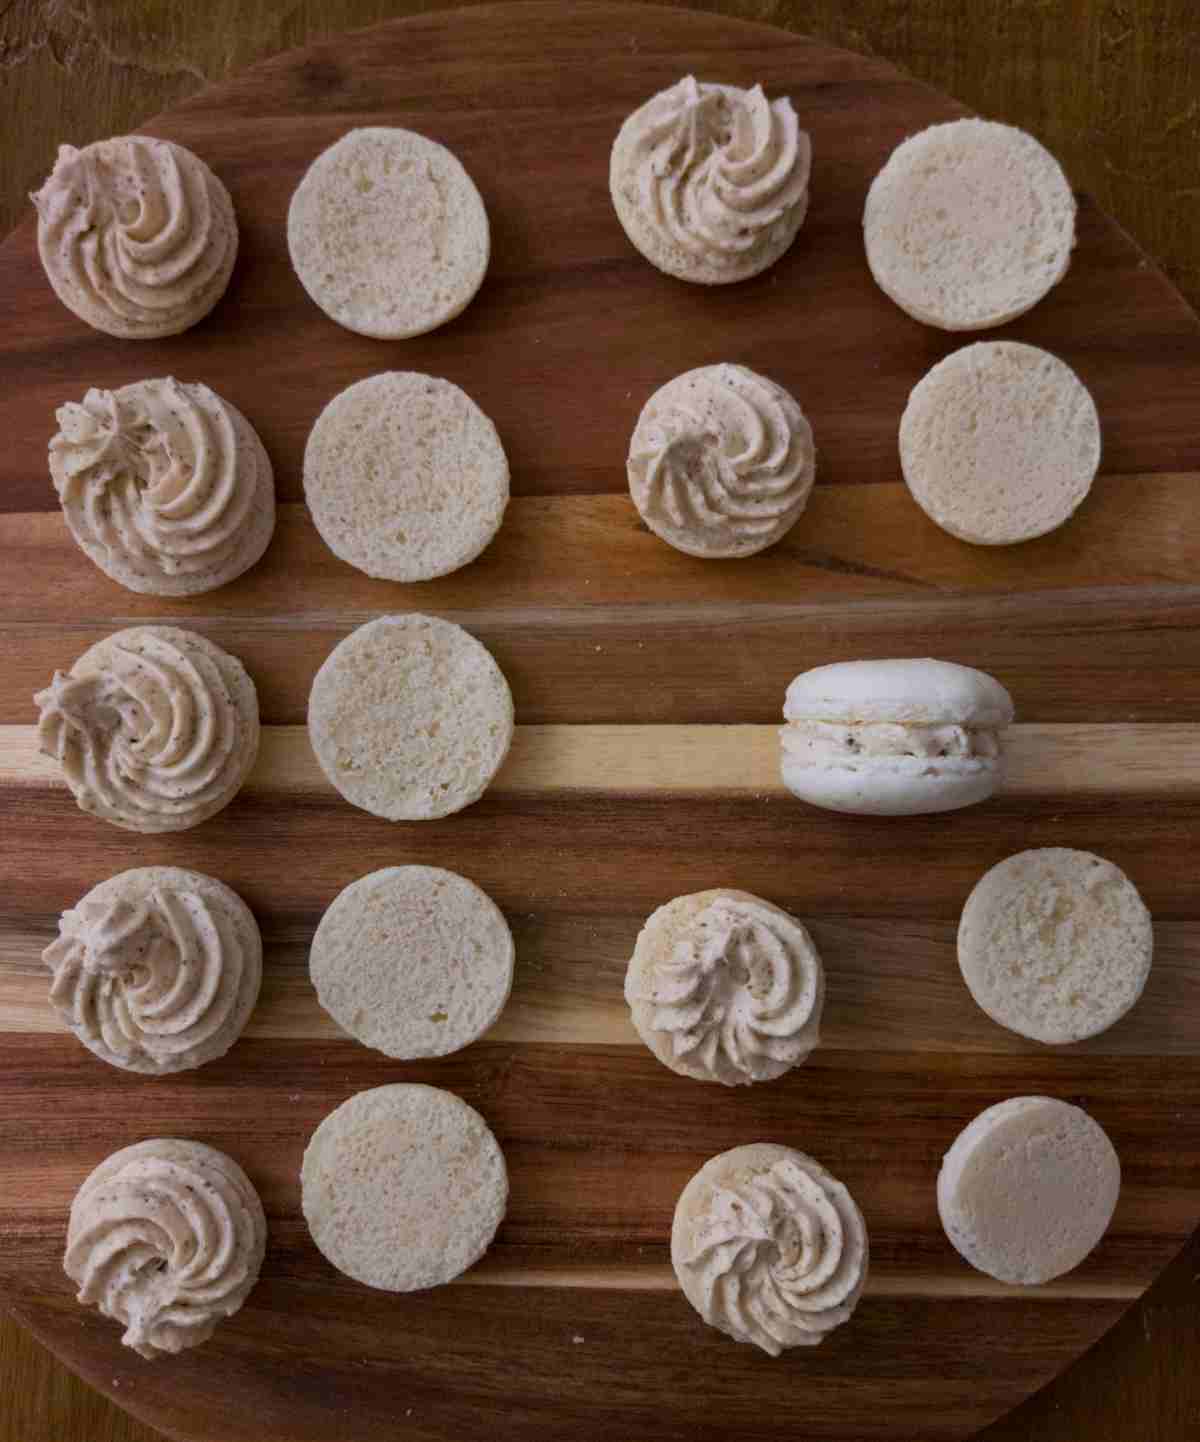 Macaron shells with buttercream on top on a wooden surface.